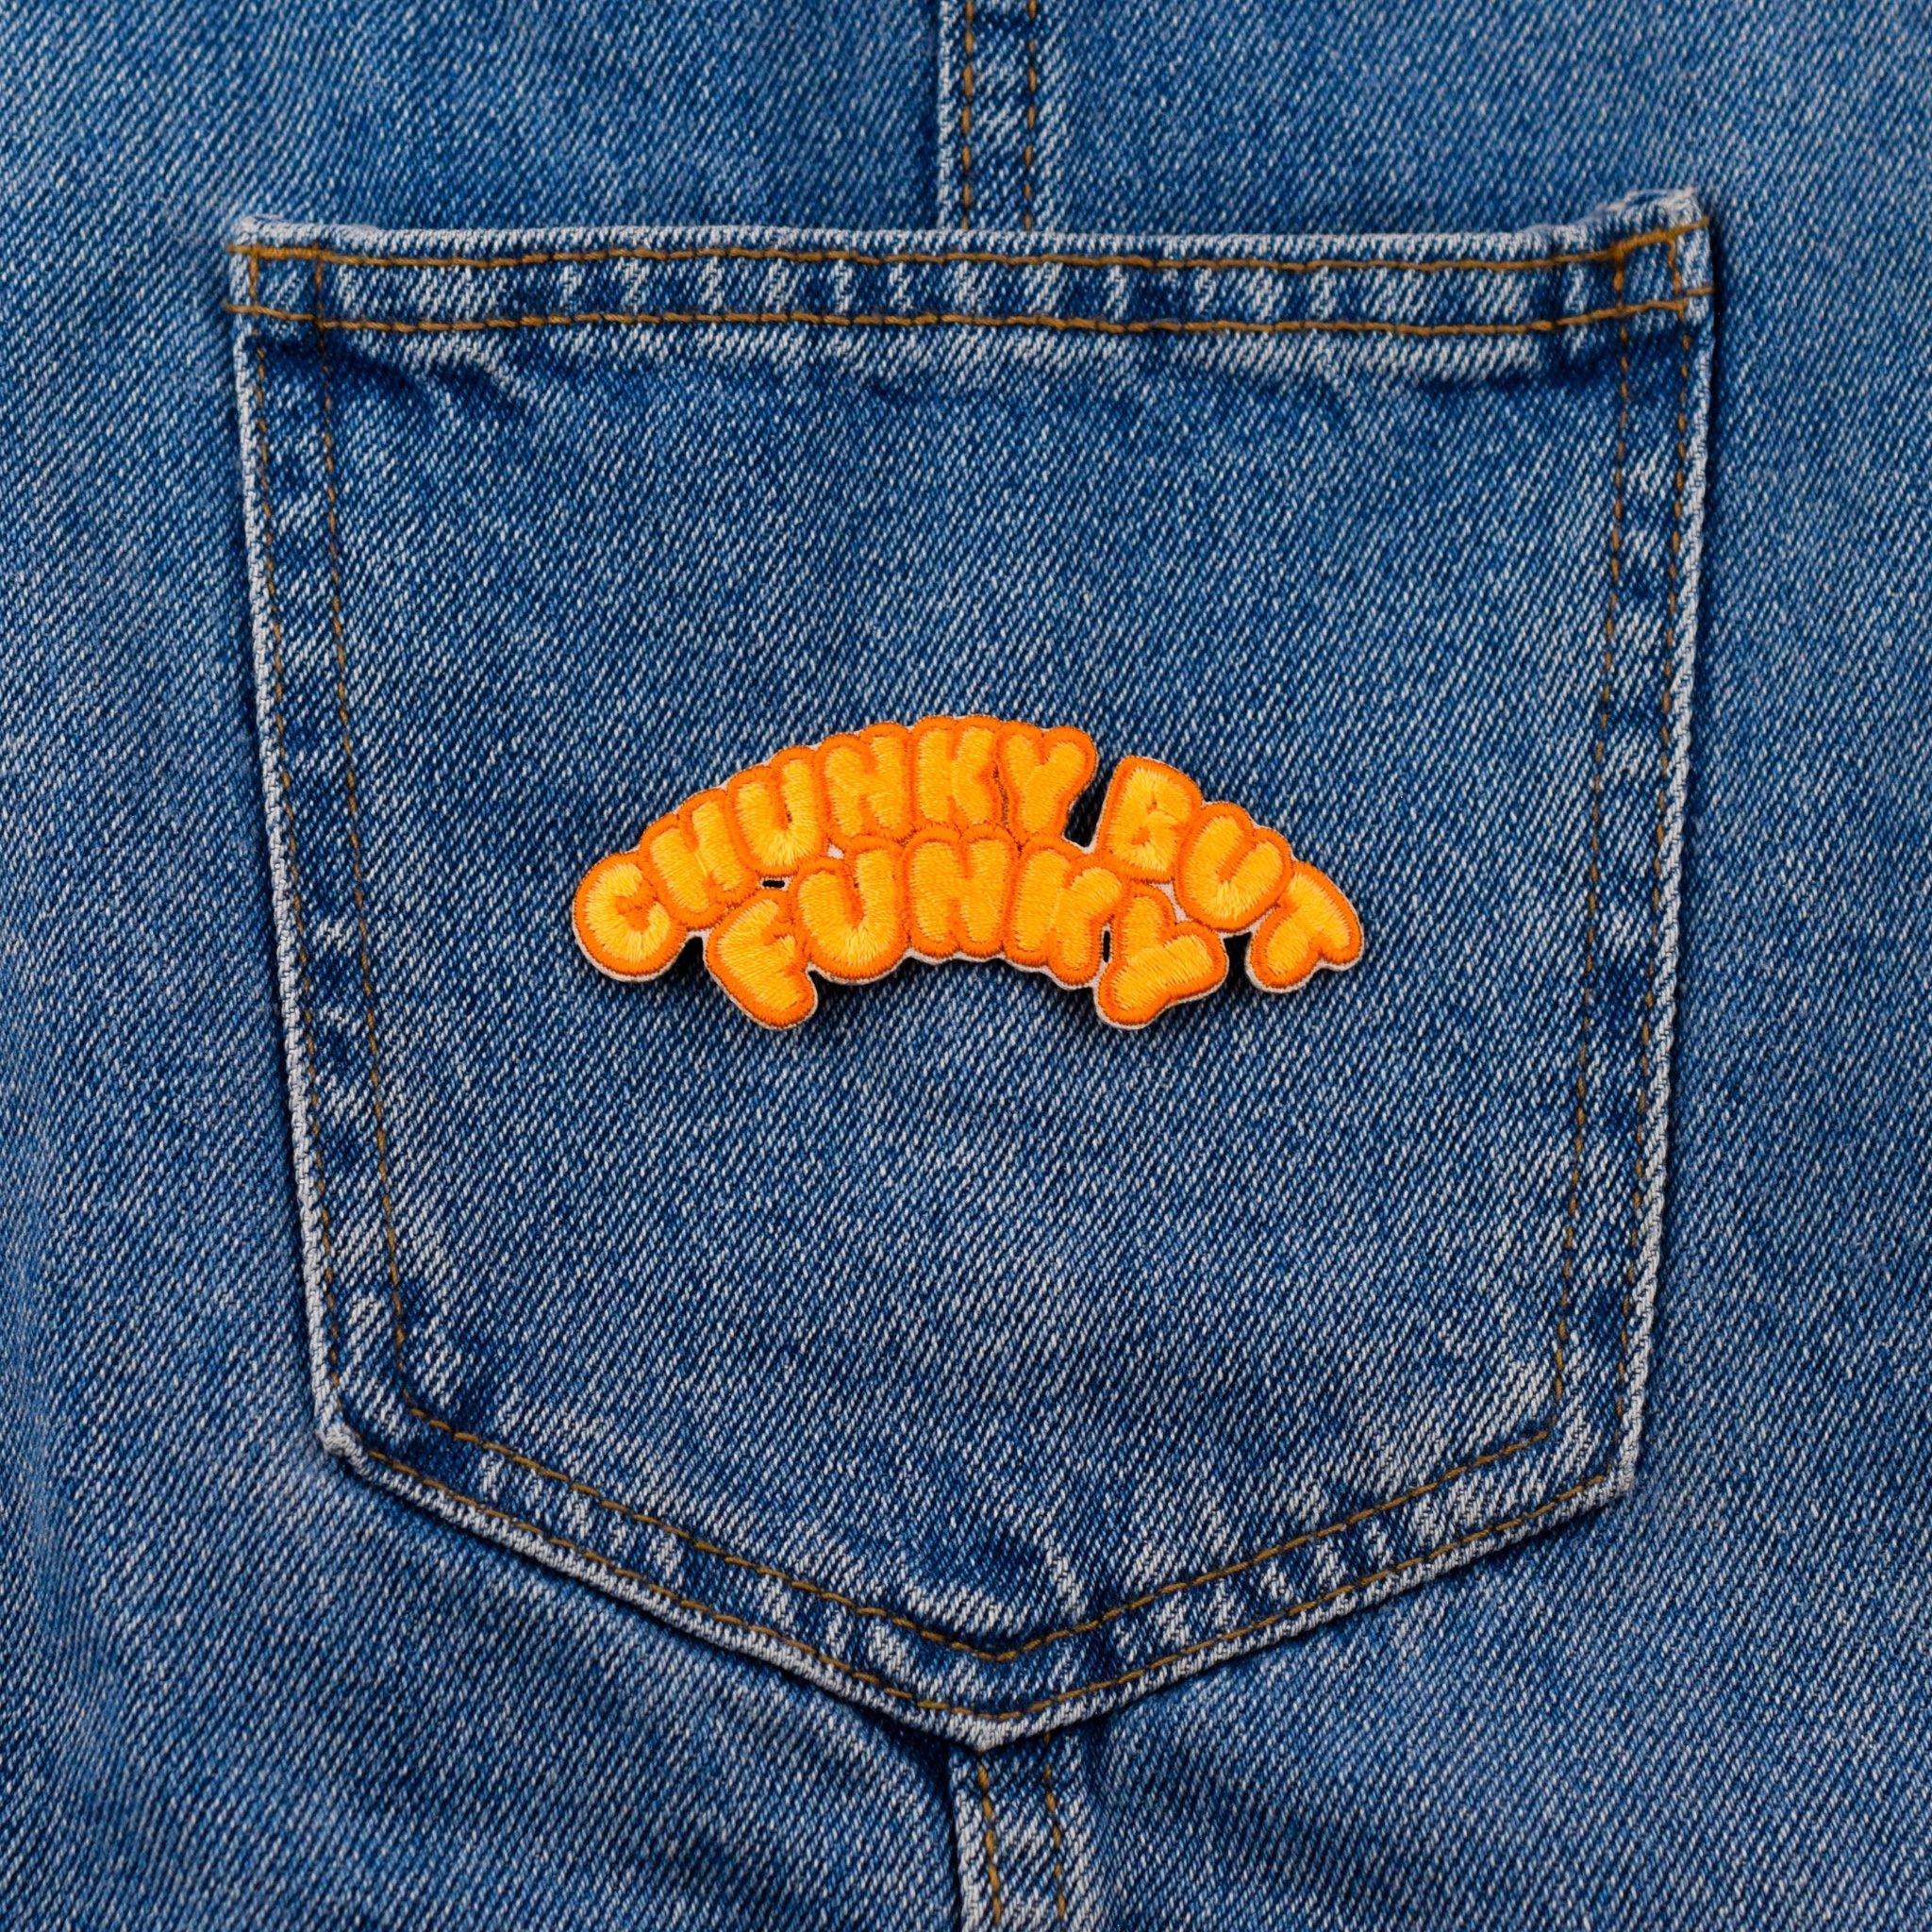 CHUNKY BUT FUNKY MultiMoodz Patch